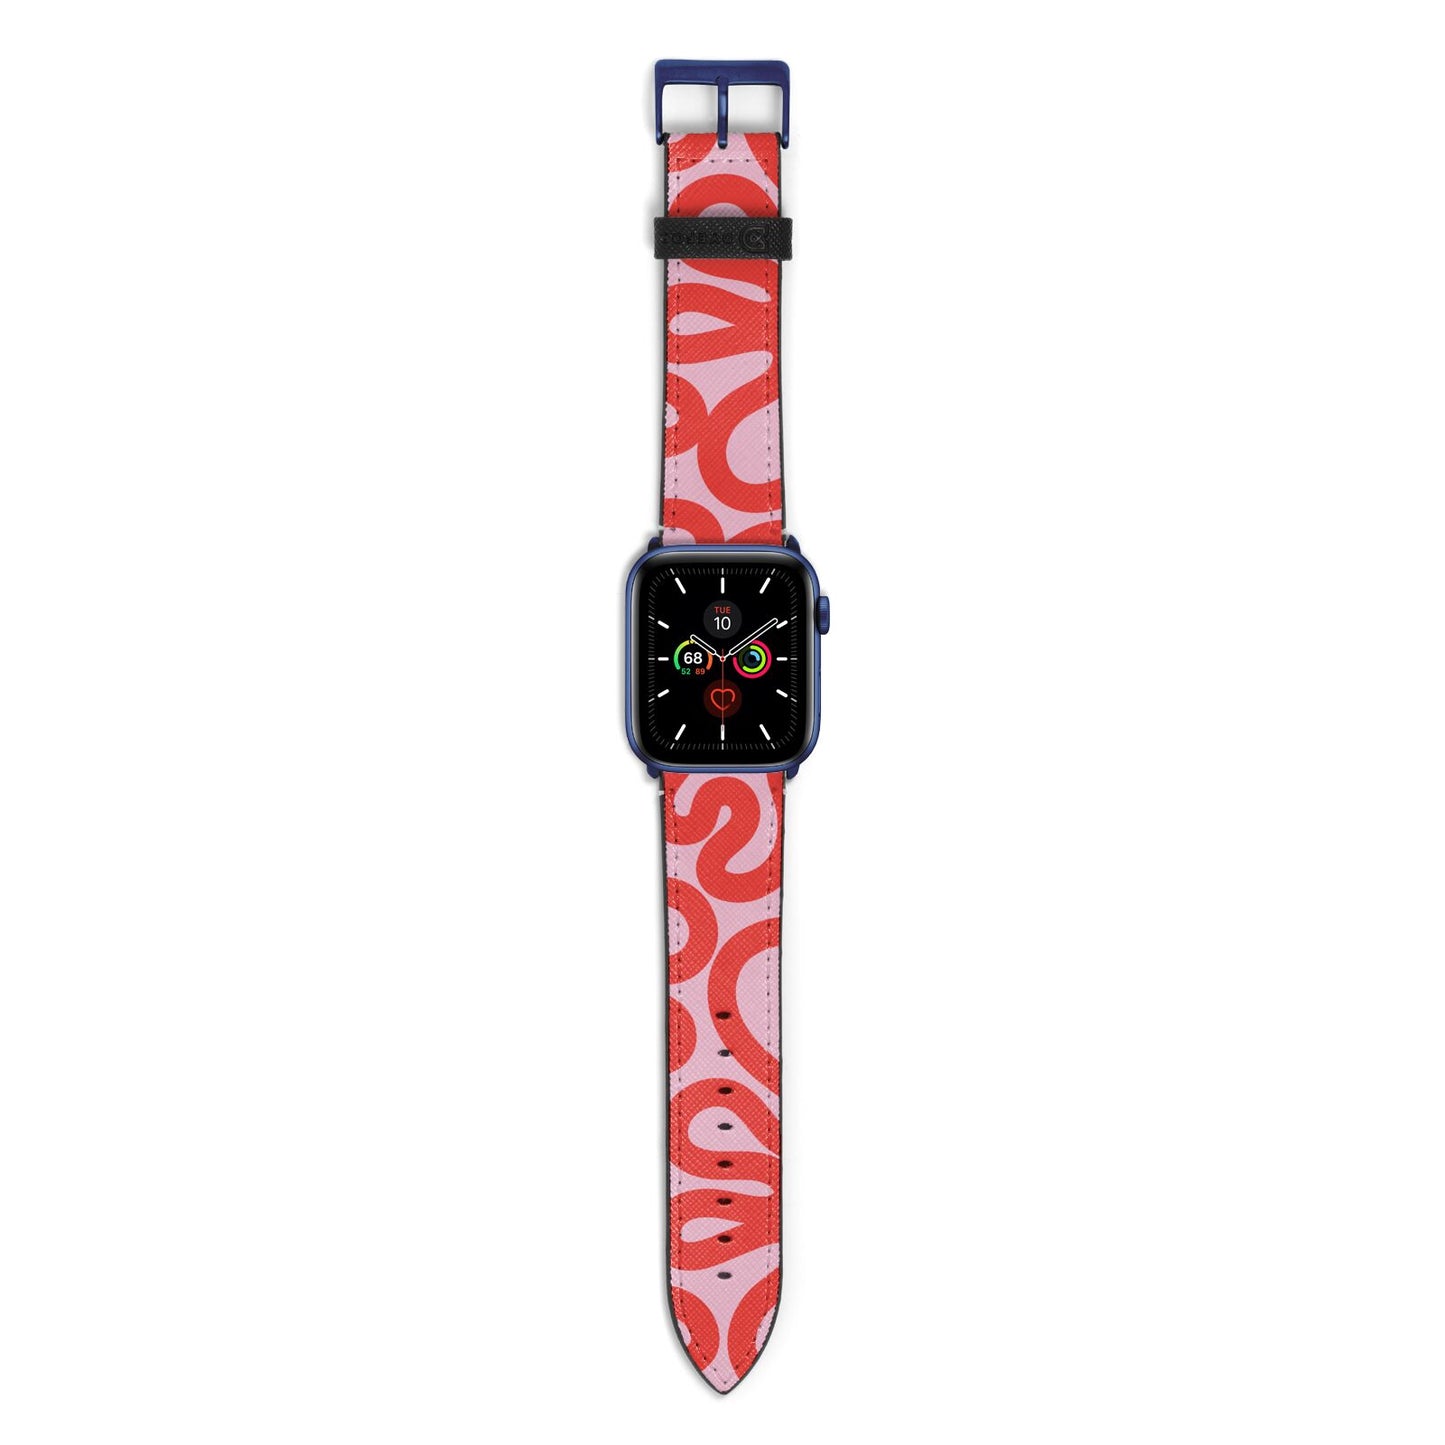 Squiggle Apple Watch Strap with Blue Hardware